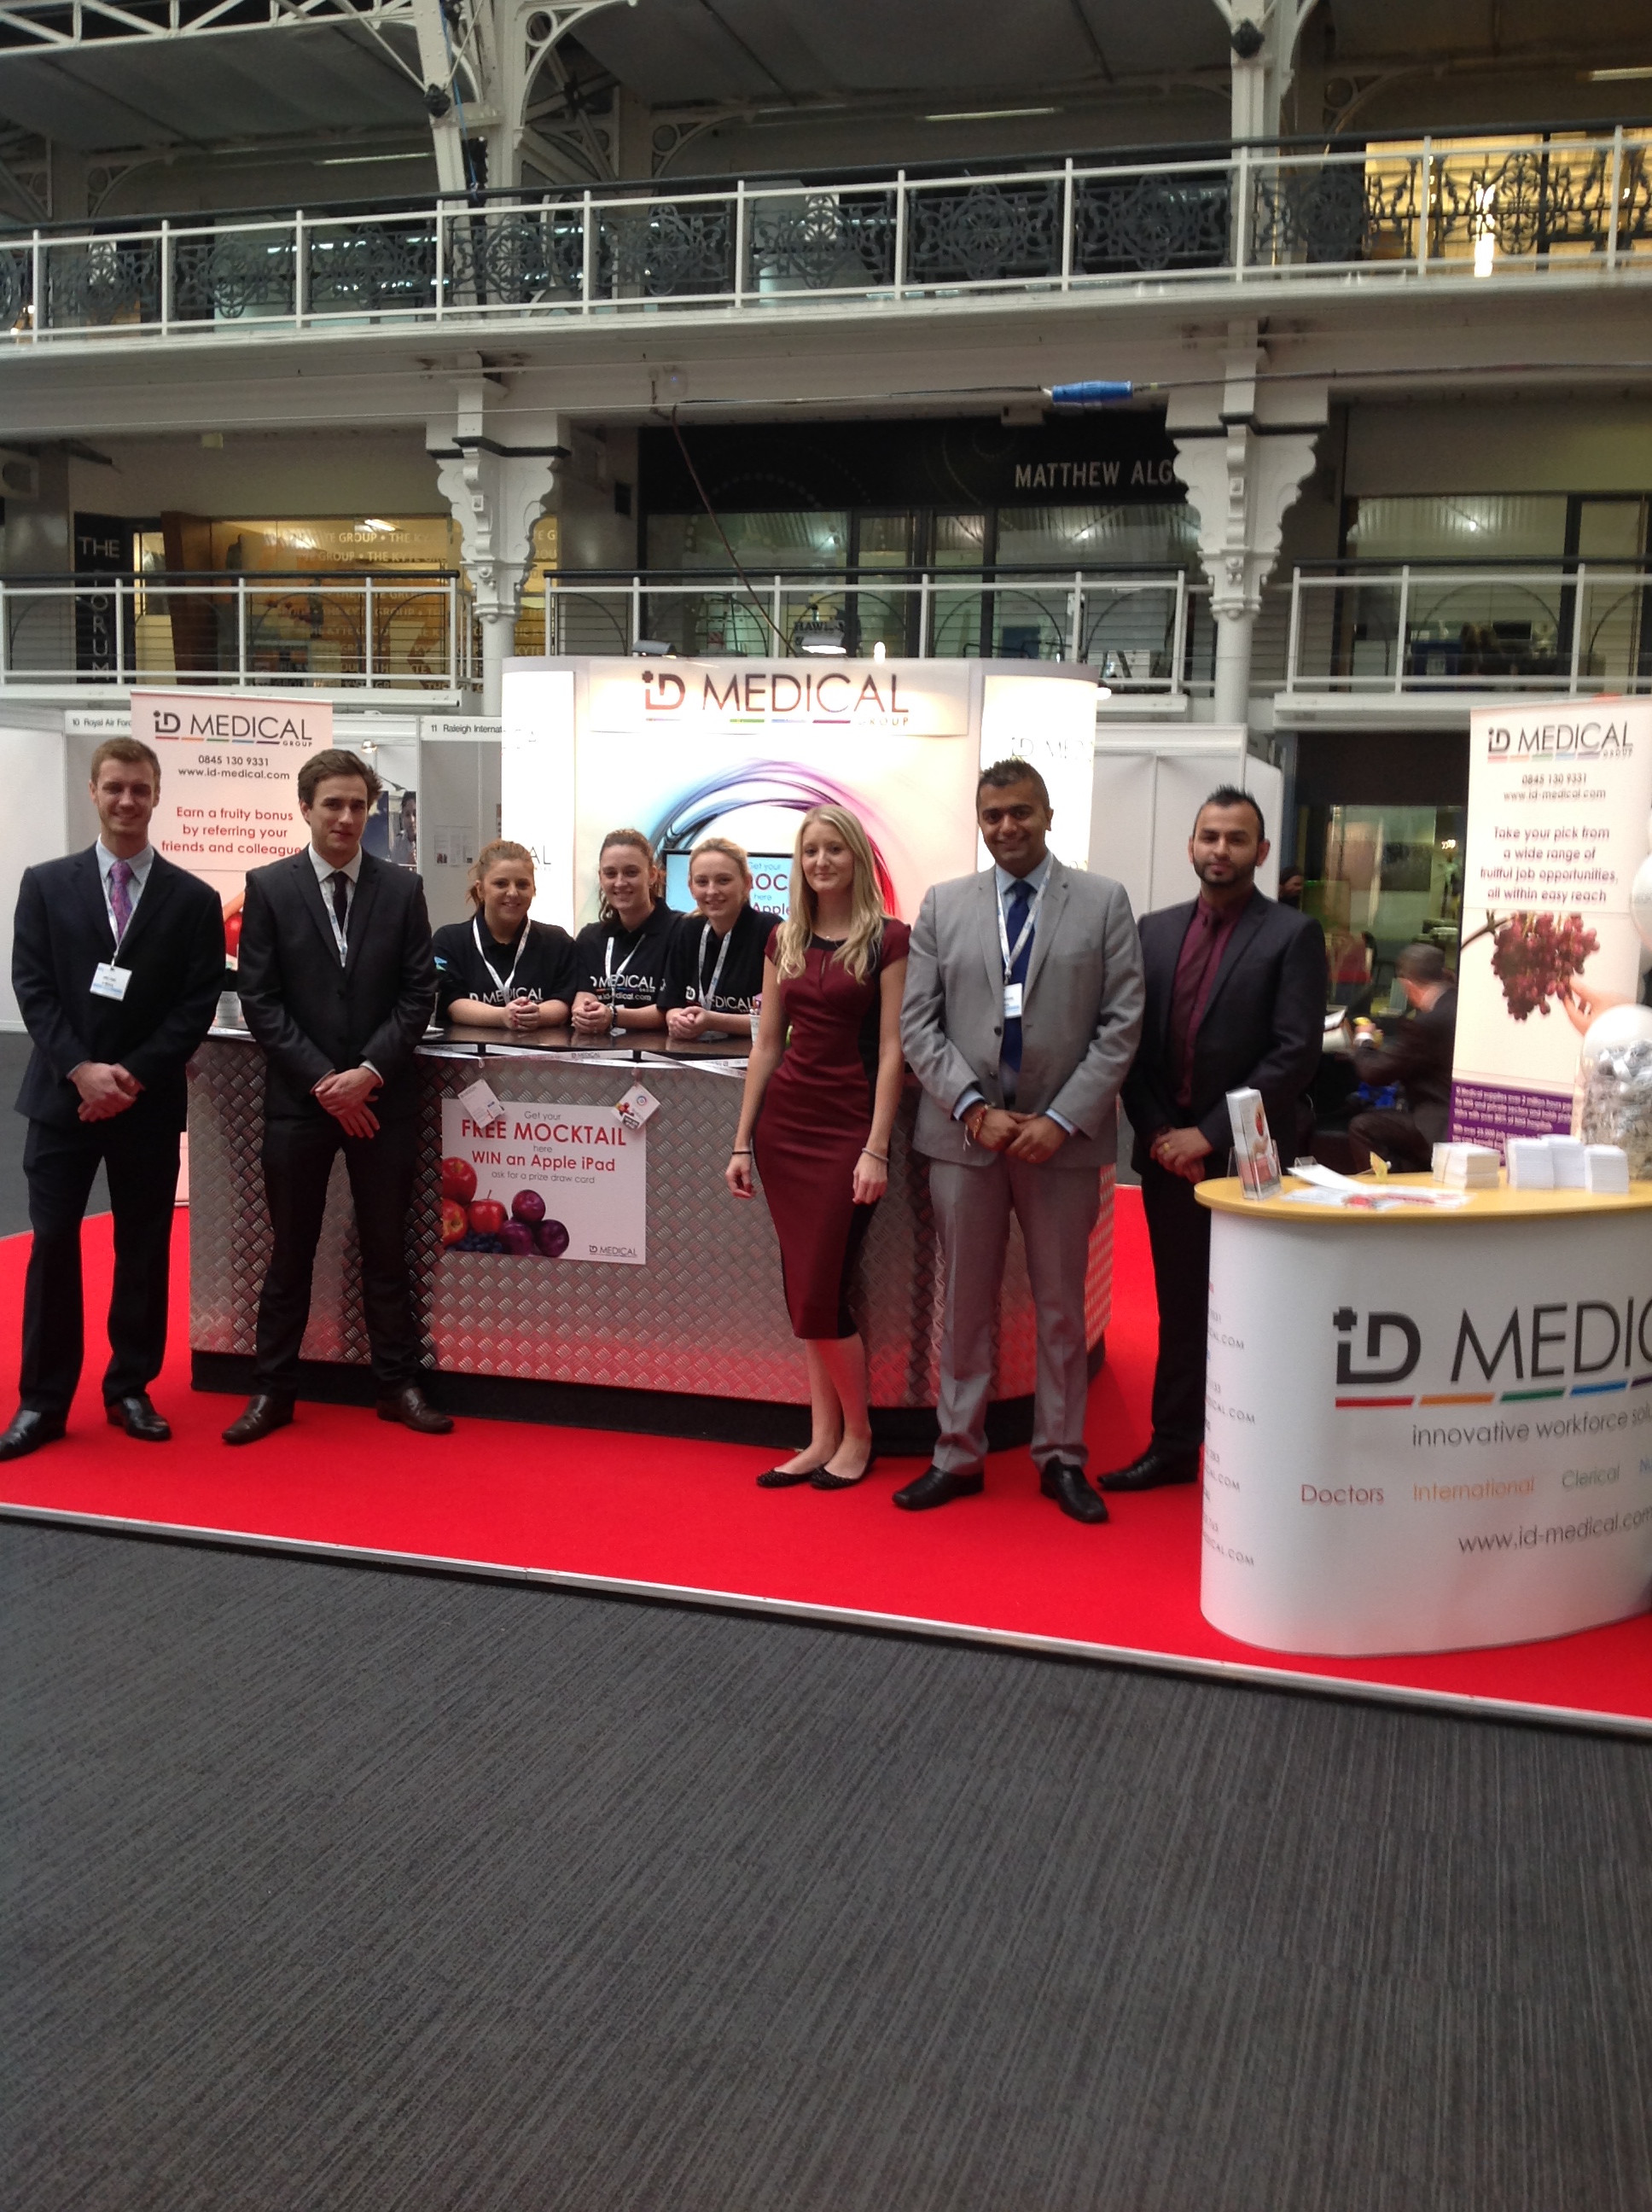 The ID Medical team at the British Medical Journal Careers Fair 2013.